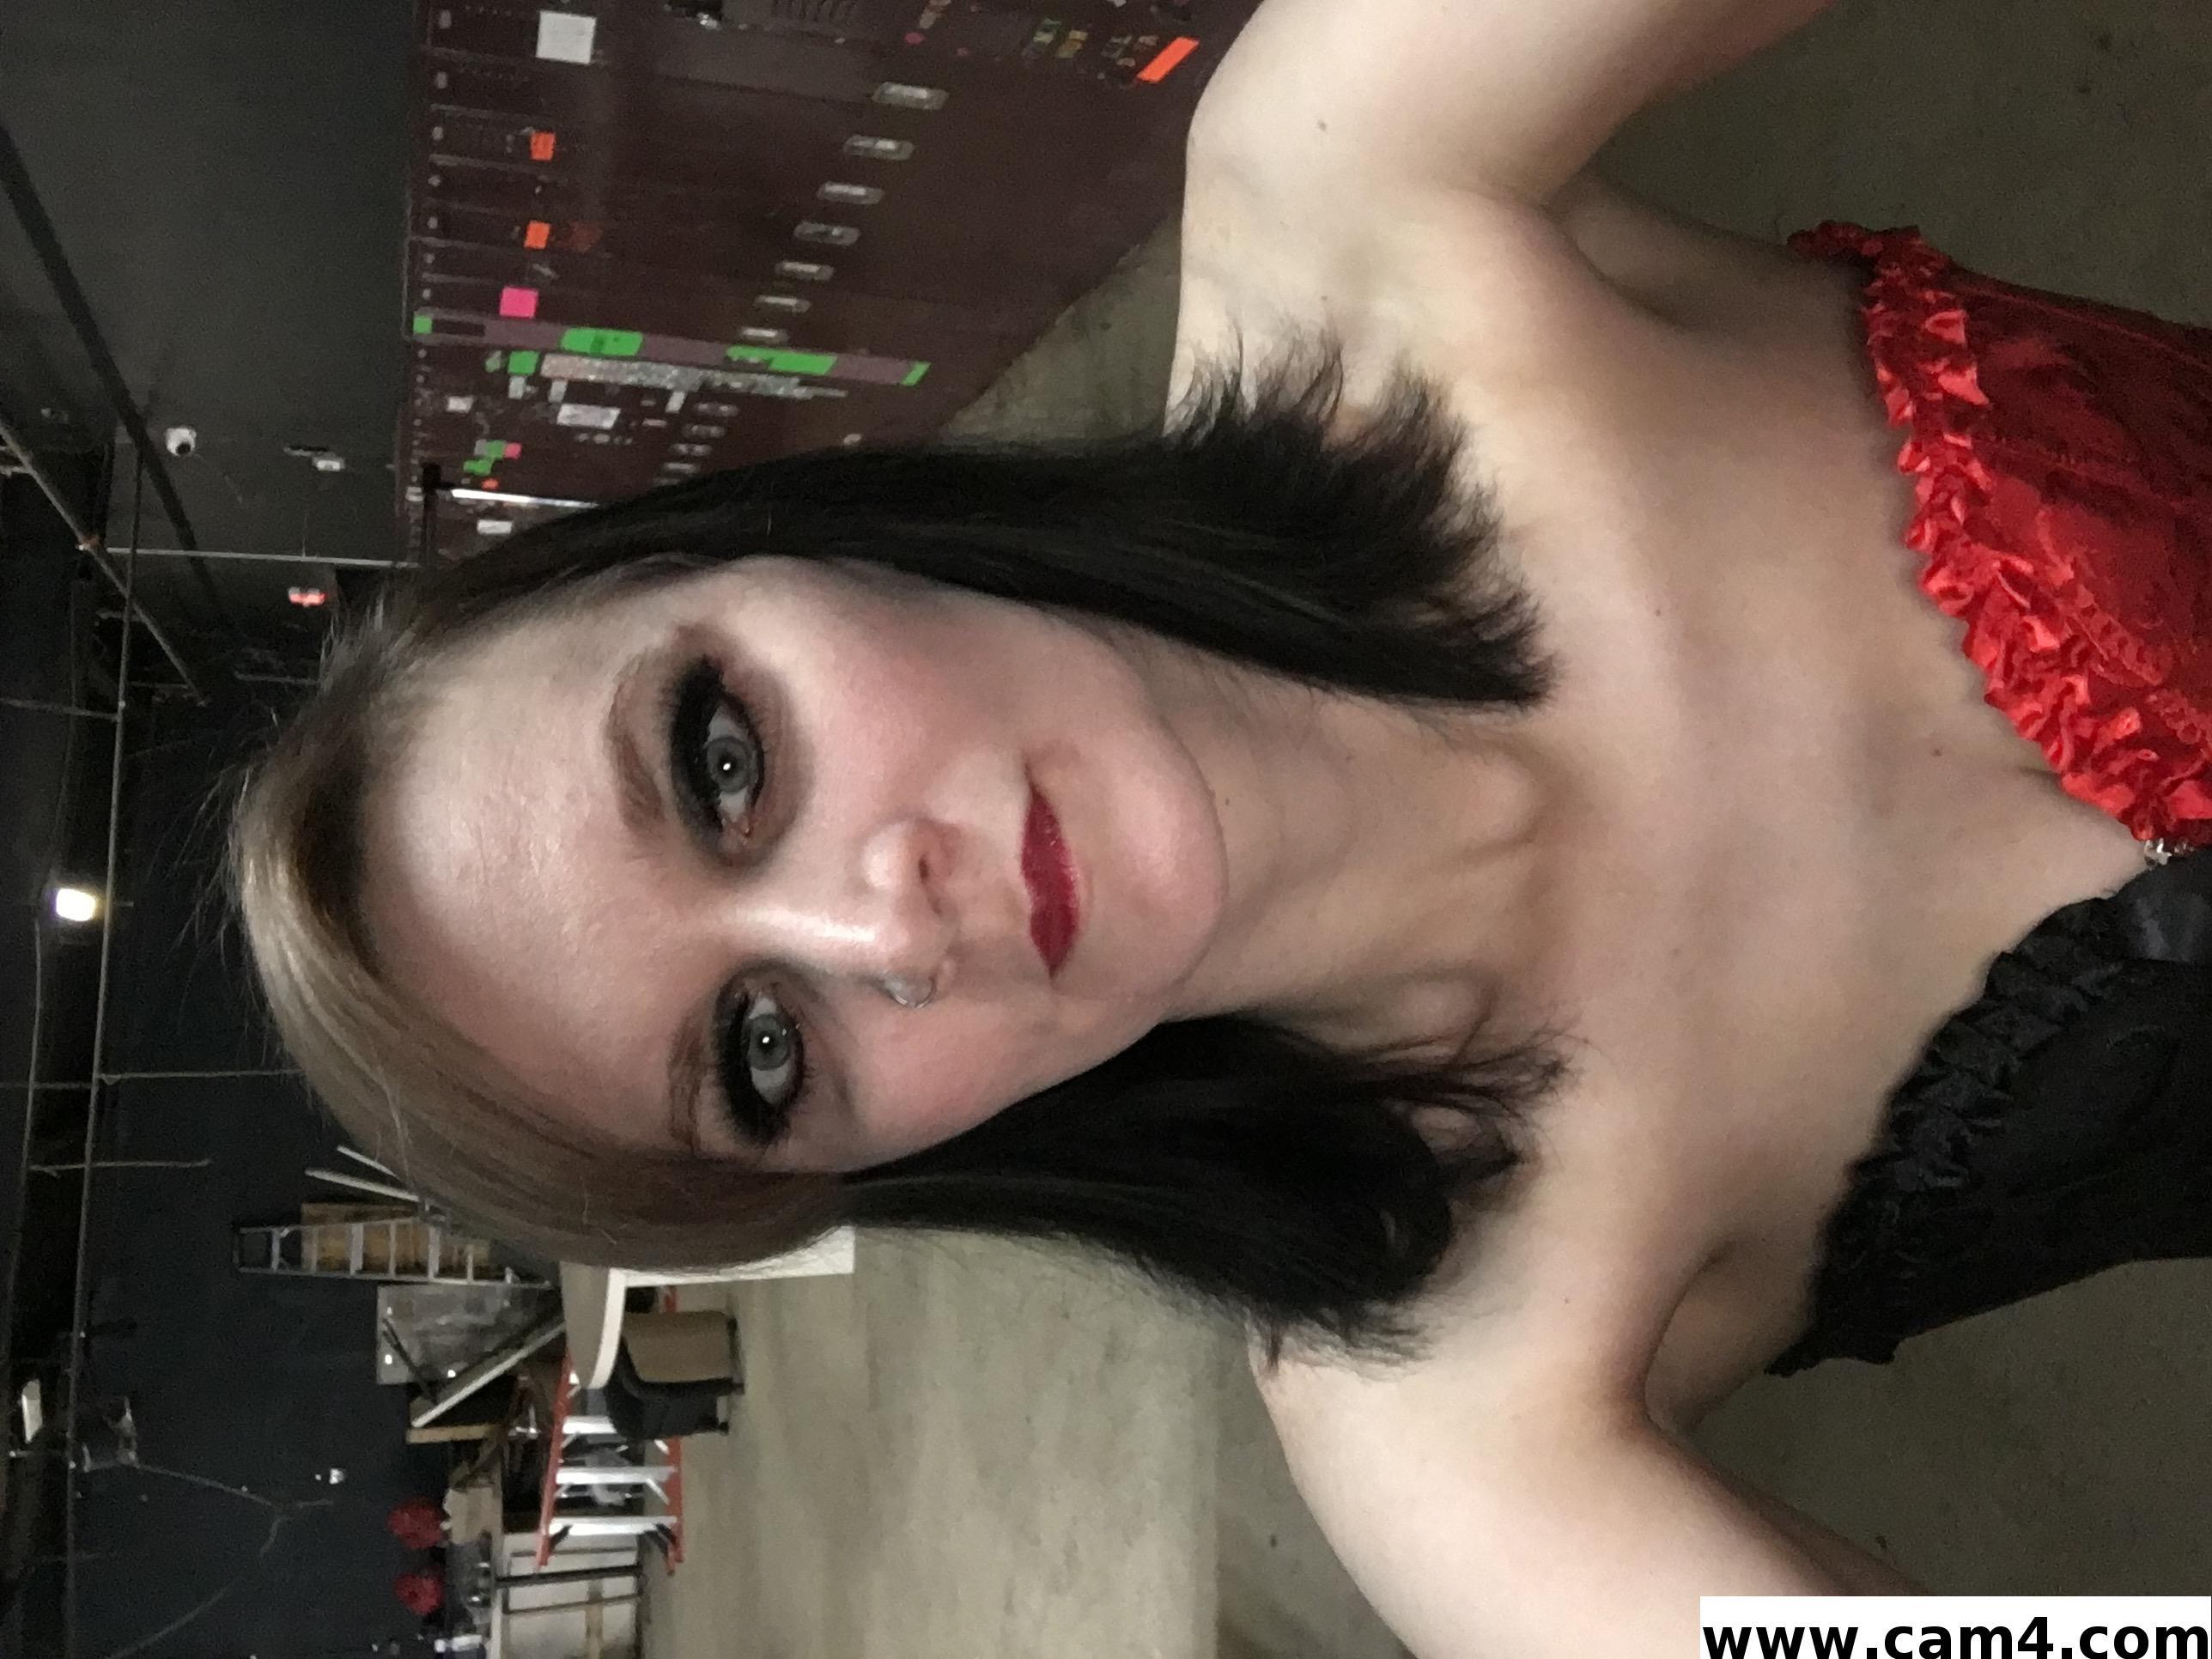 strip chat live Hotmodel1984